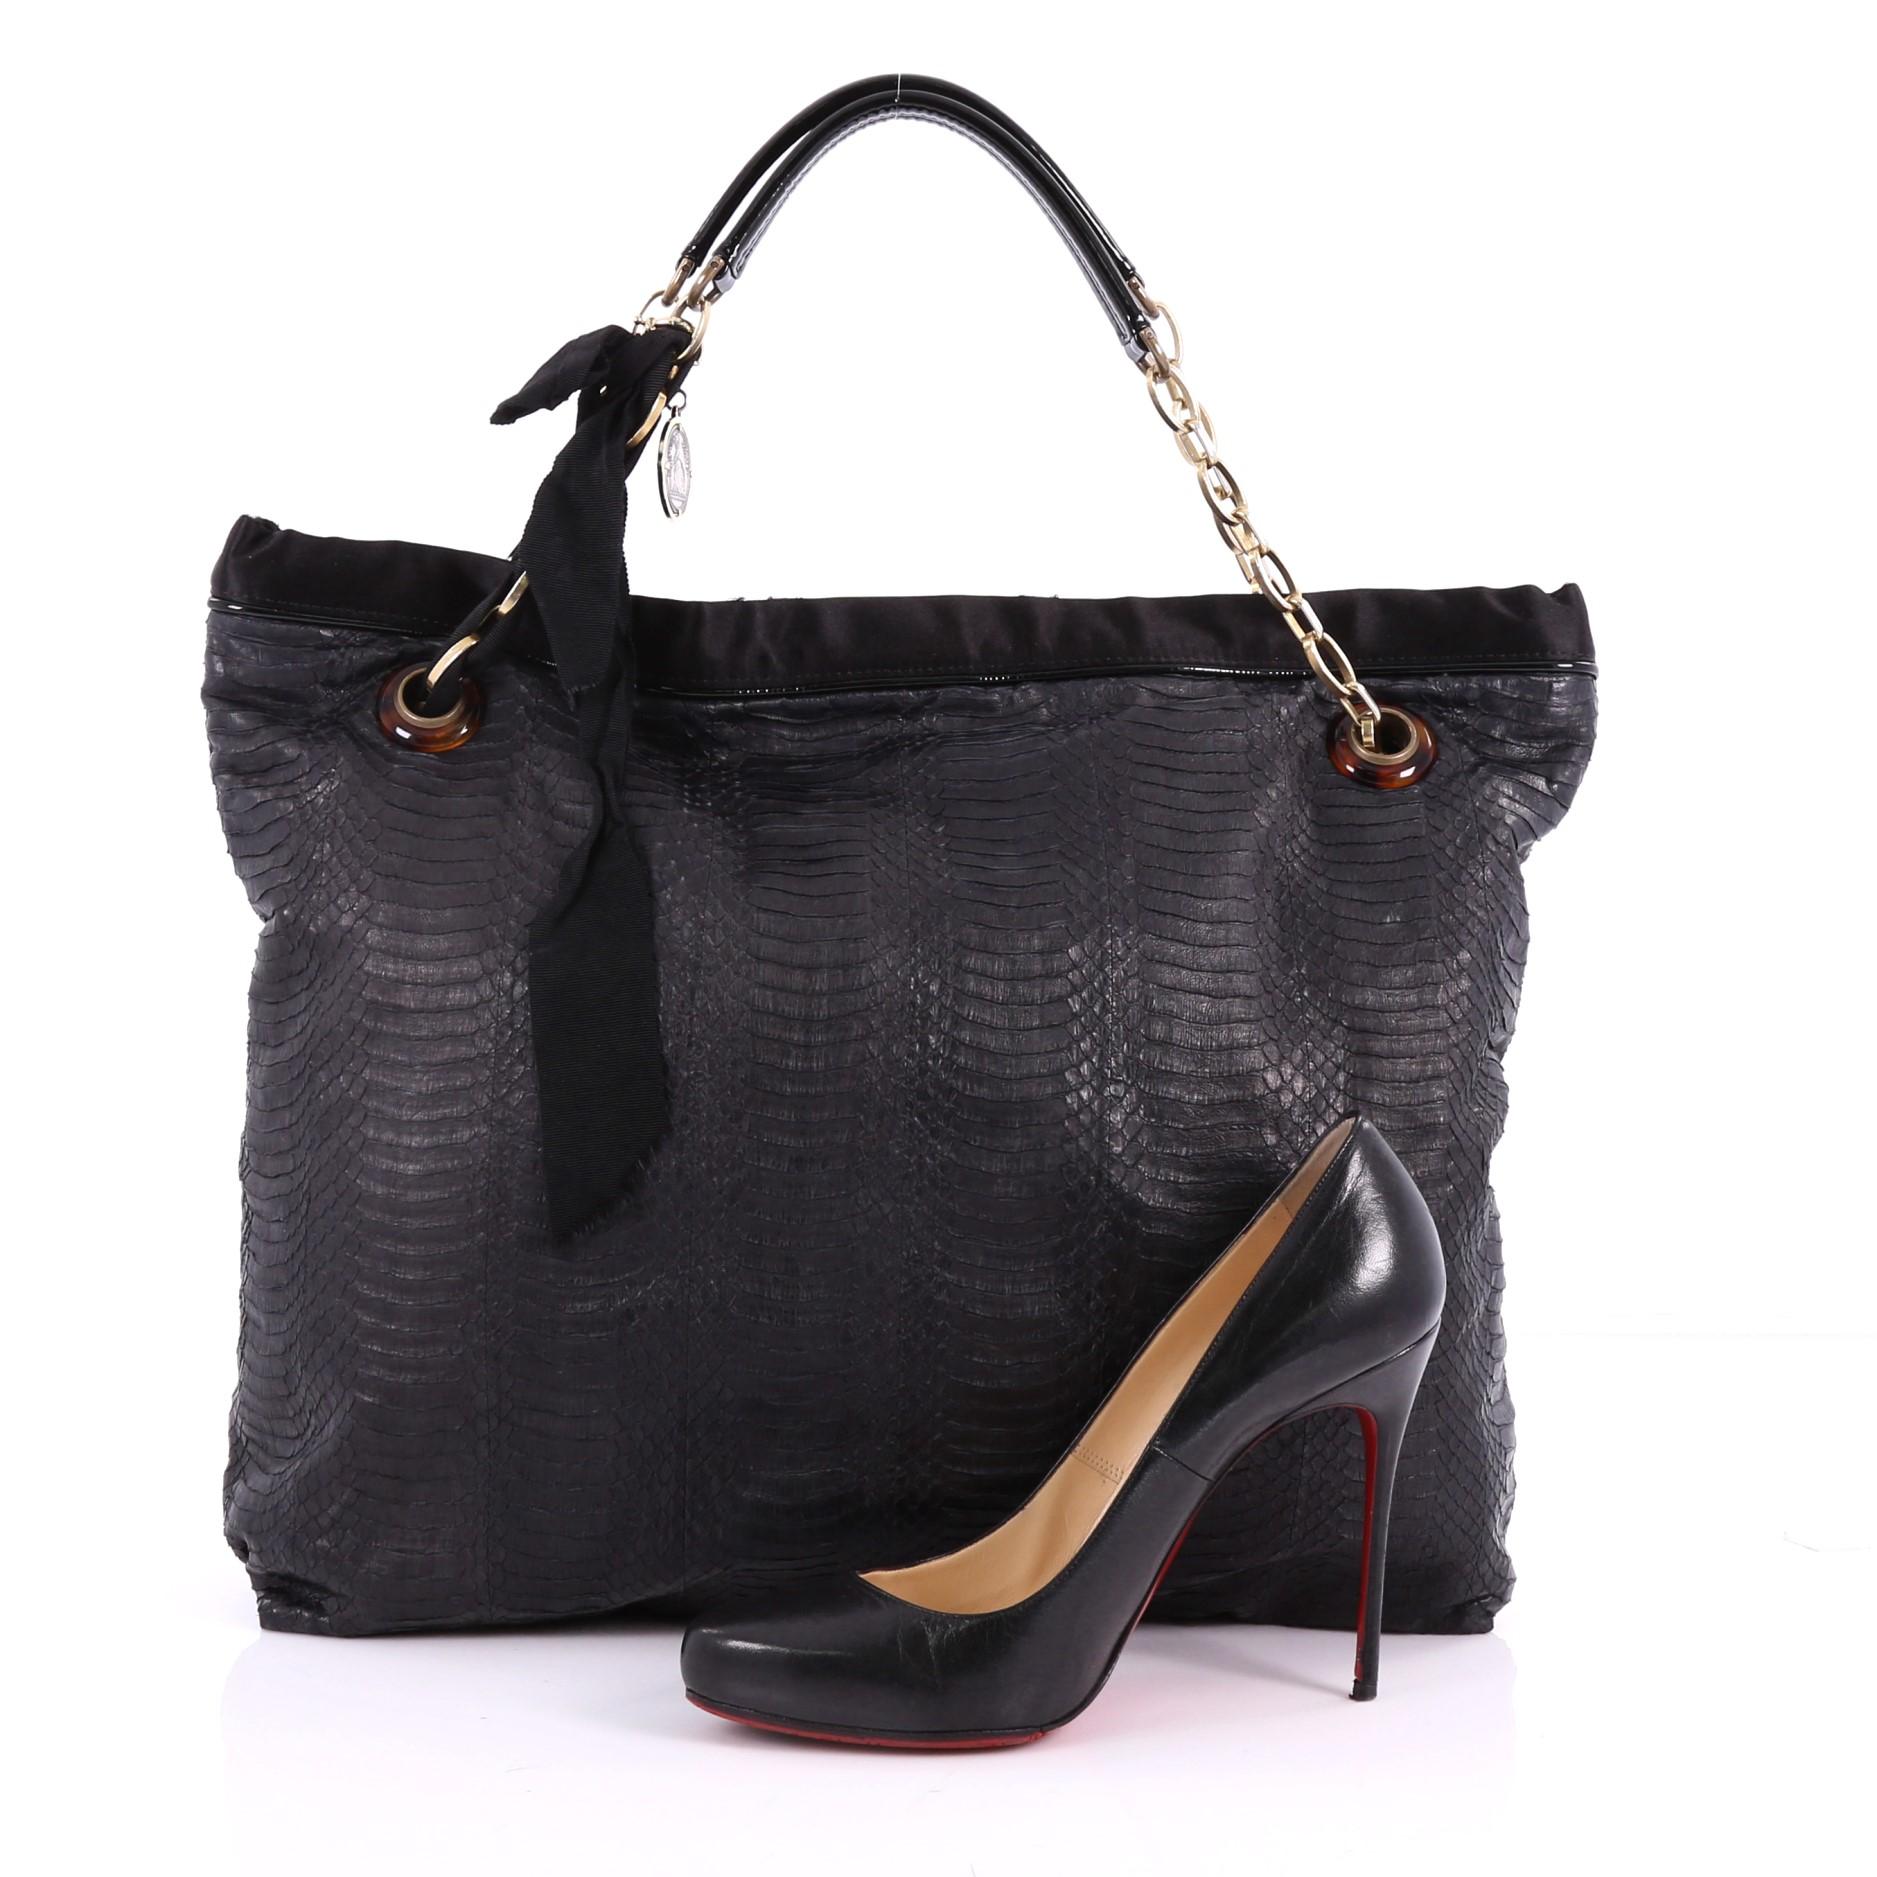 This authentic Lanvin Amalia Cabas Tote Python Large is feminine in design and ideal for everyday use. Crafted from genuine black python, this classic, oversized tote features polished chain straps with a matching tied ribbon design and charm,